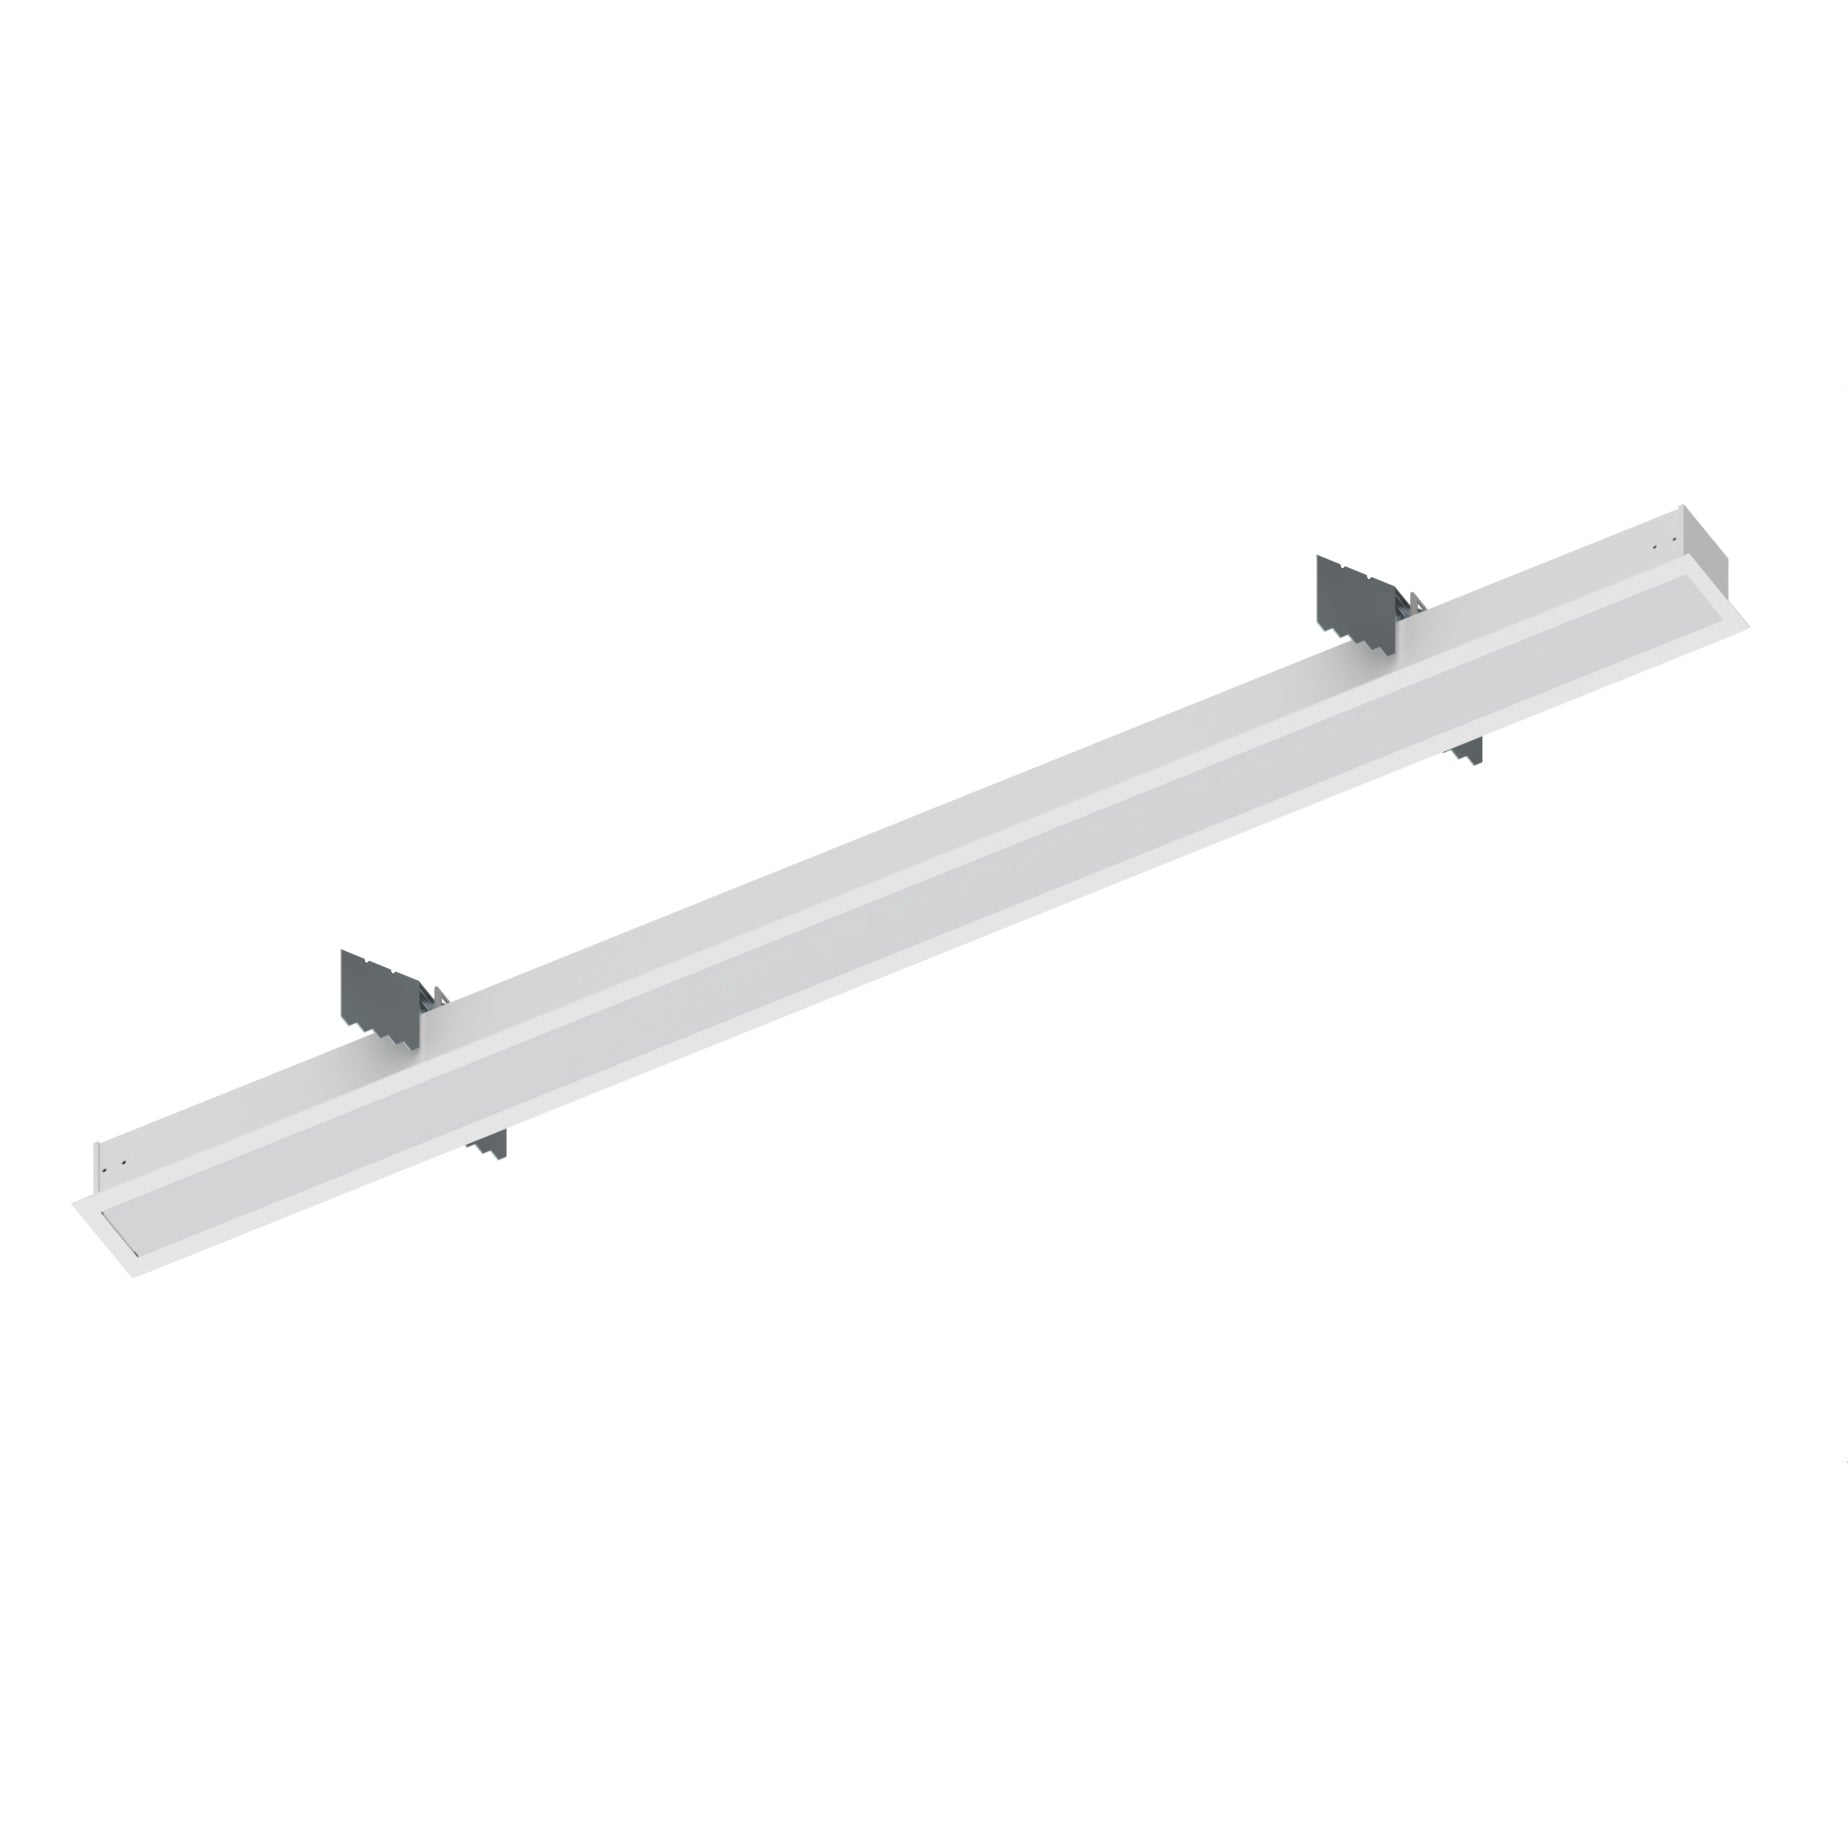 Nora Lighting NRLIN-41035W - Linear - 4' L-Line LED Recessed Linear, 4200lm / 3500K, White Finish